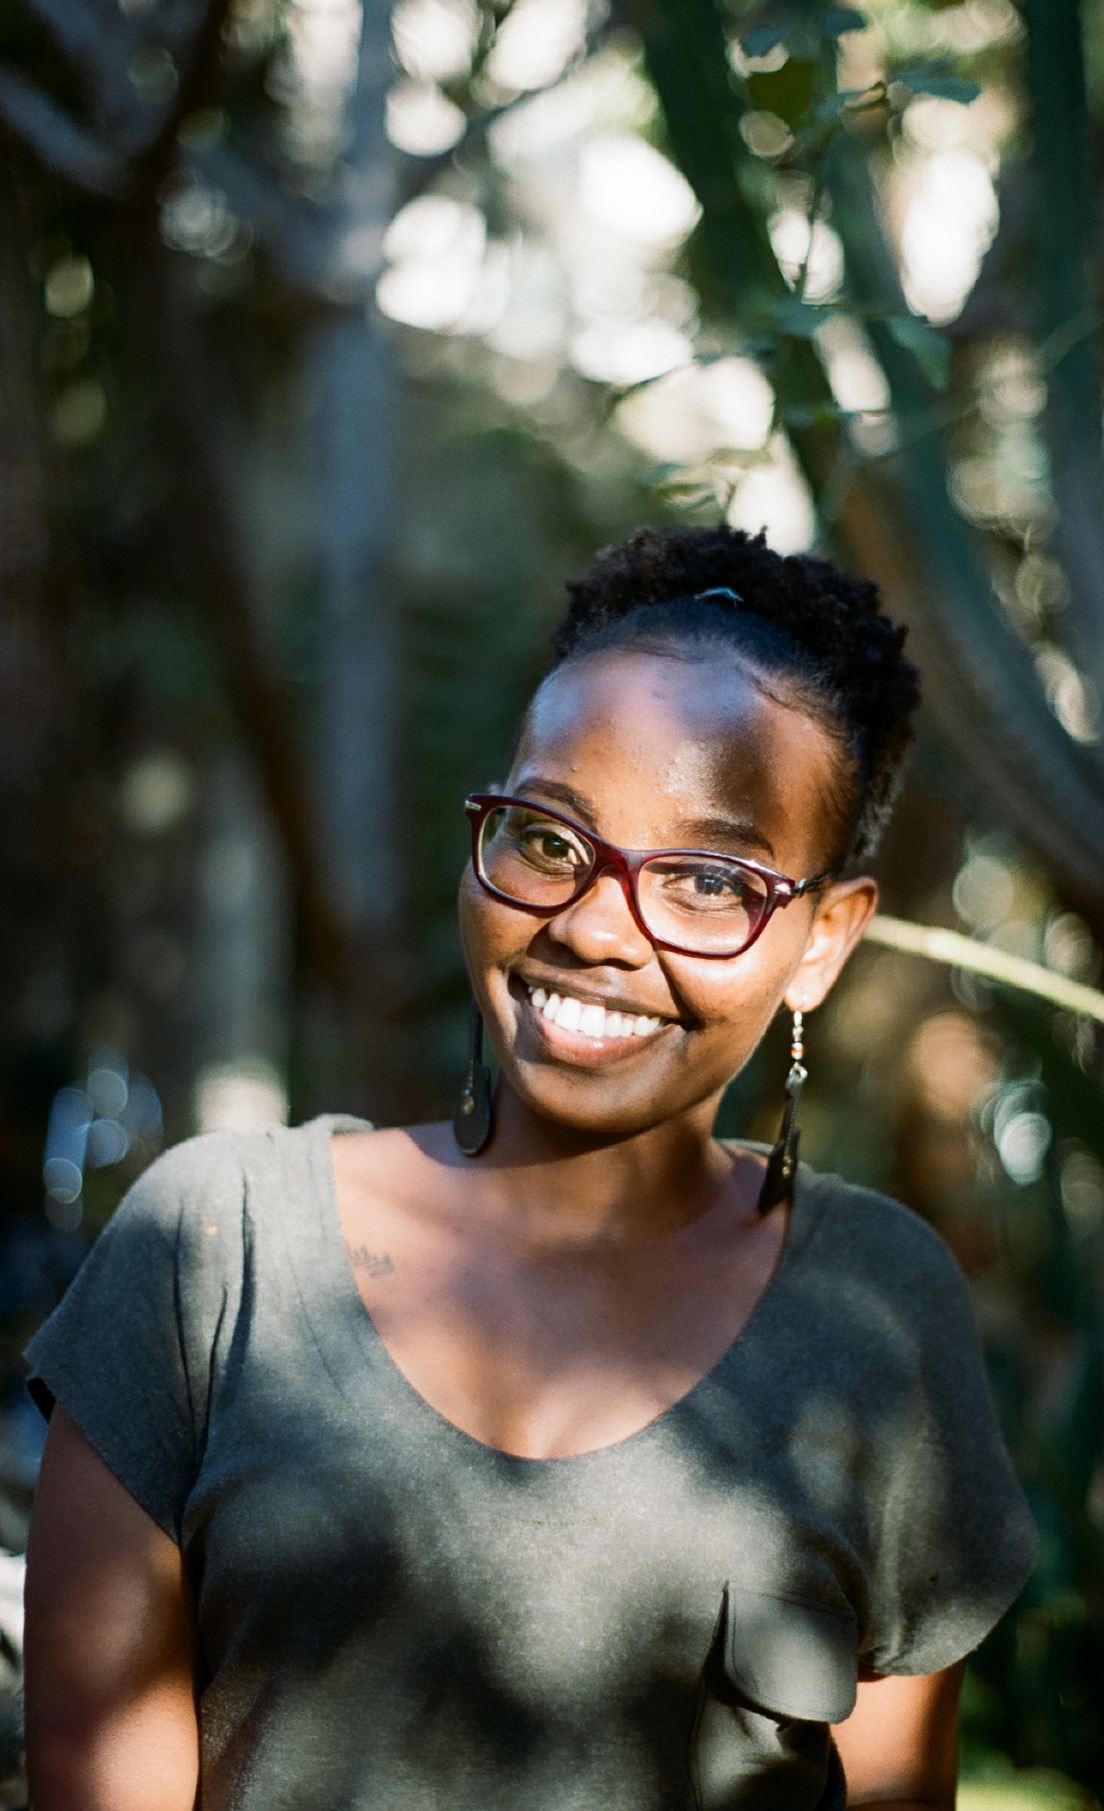 Photo portrait of young African woman smiling with glasses and a green top amongst greenery in the background.